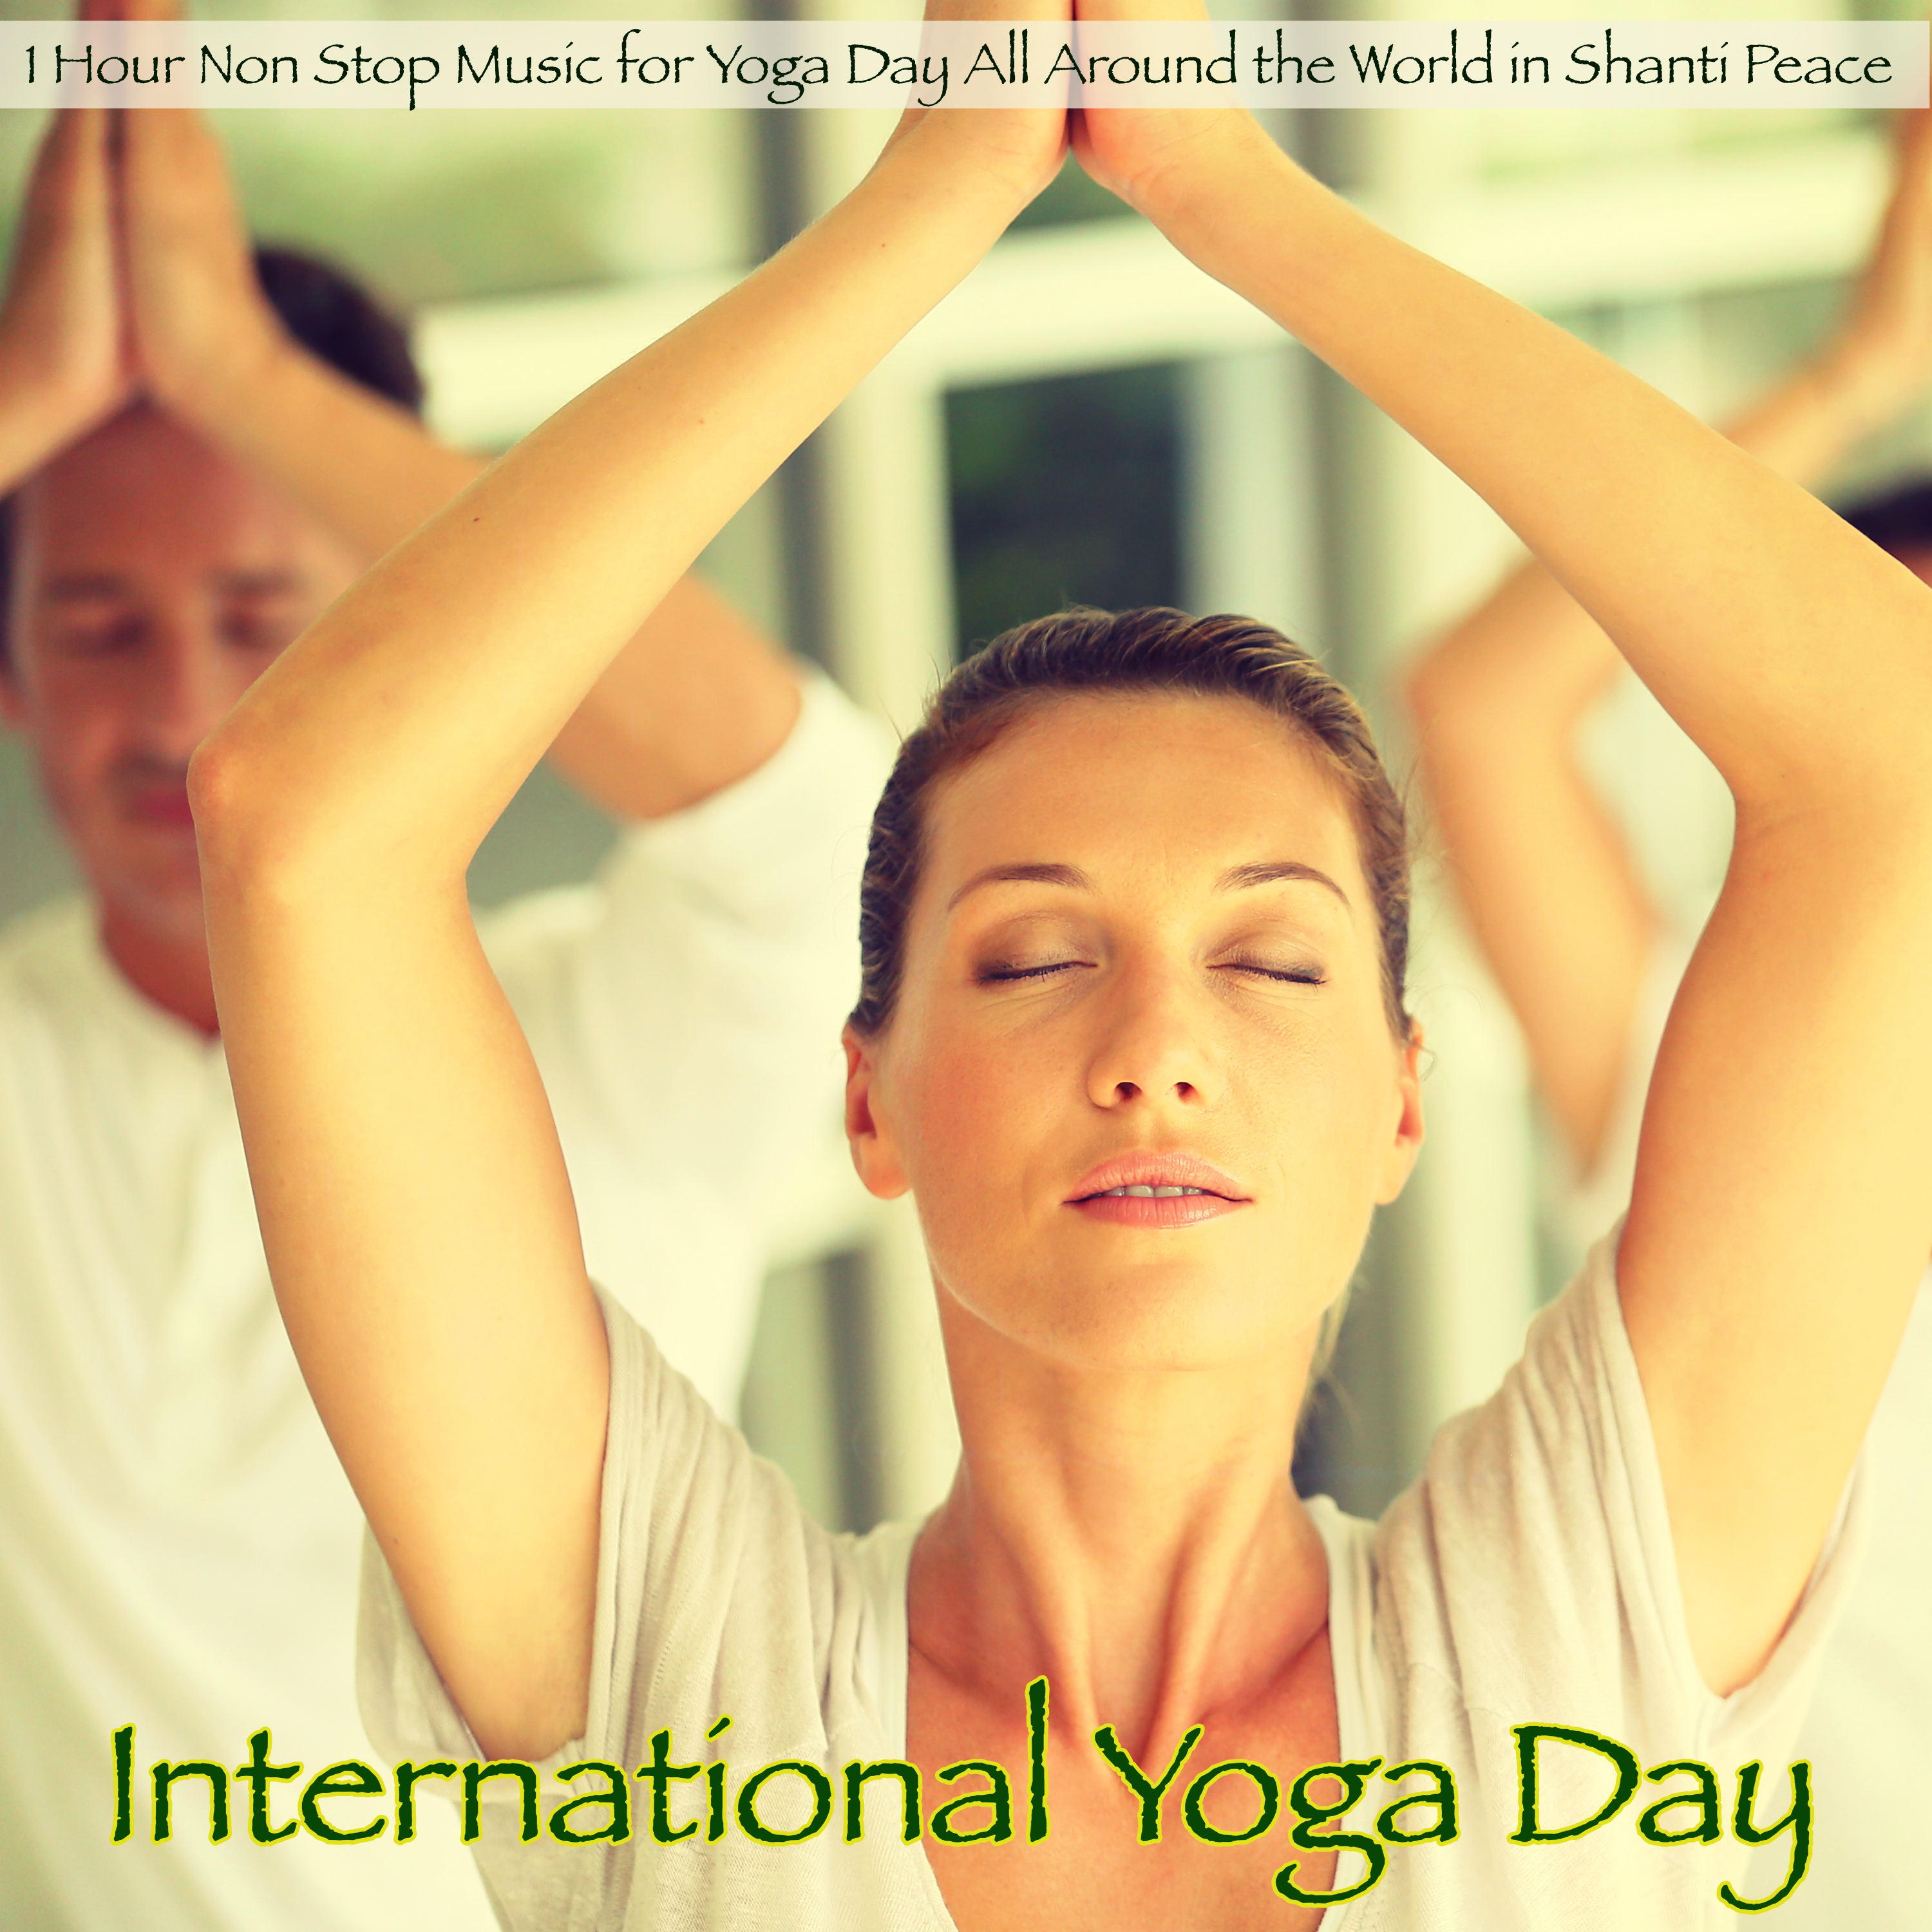 International Yoga Day – 1 Hour Non Stop Music for Yoga Day All Around the World in Shanti Peace